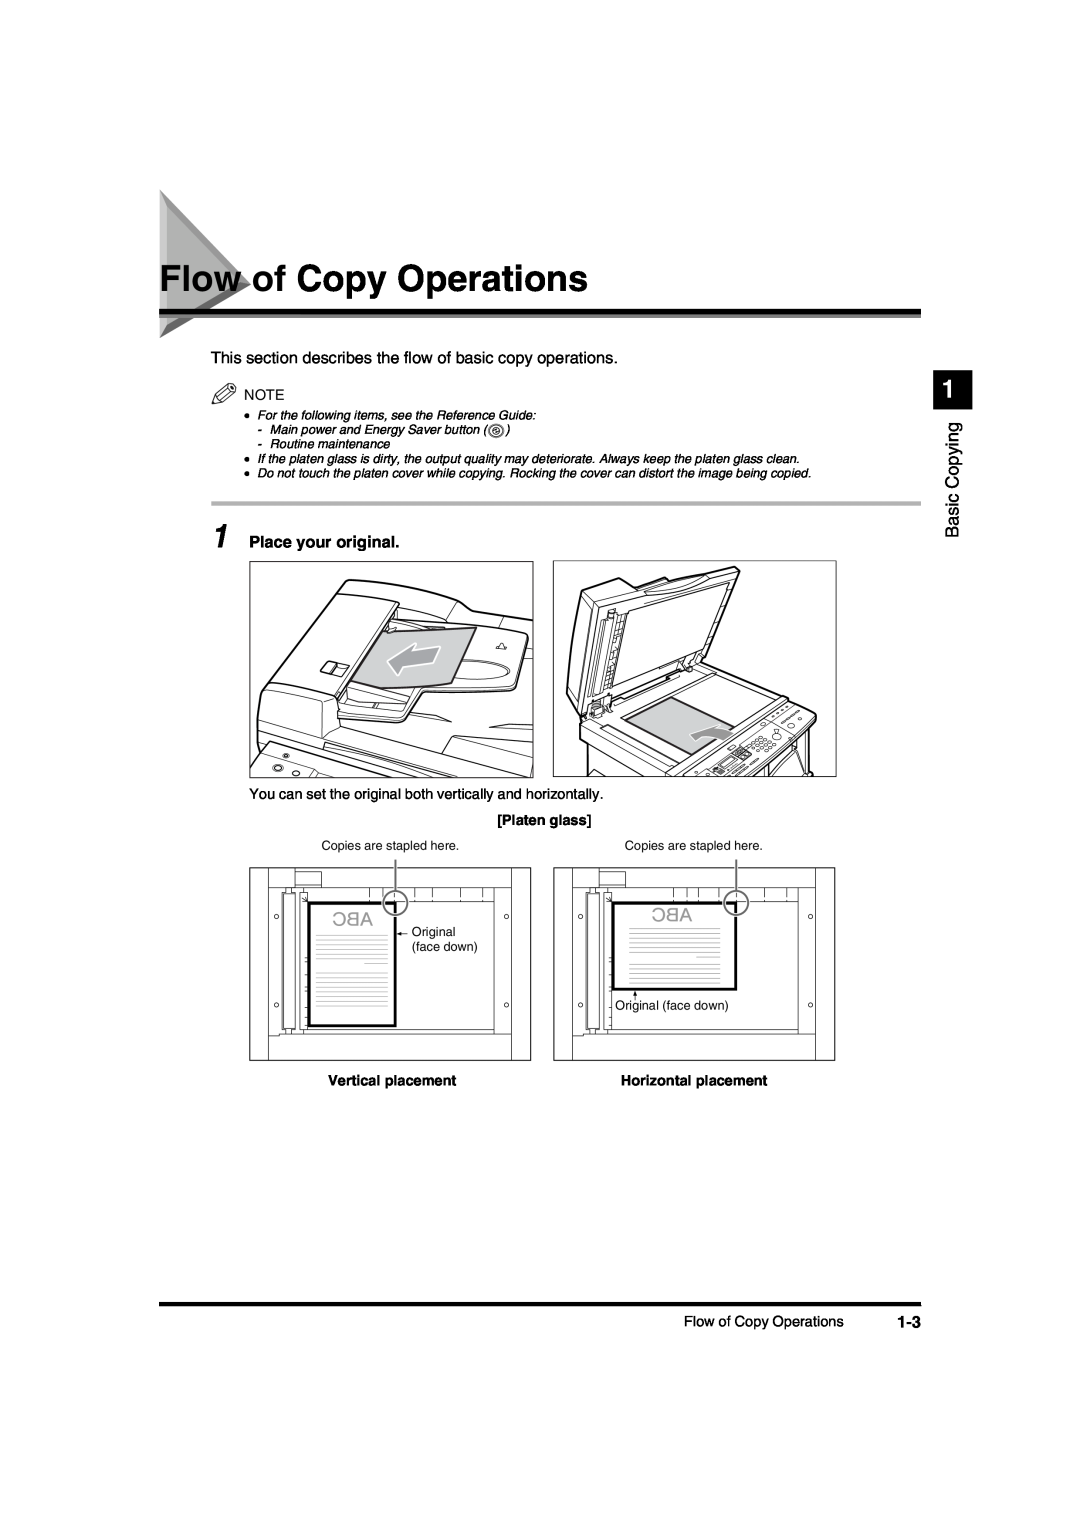 Canon IR1600 manual Flow of Copy Operations, Place your original, Basic Copying, Platen glass, Vertical placement 